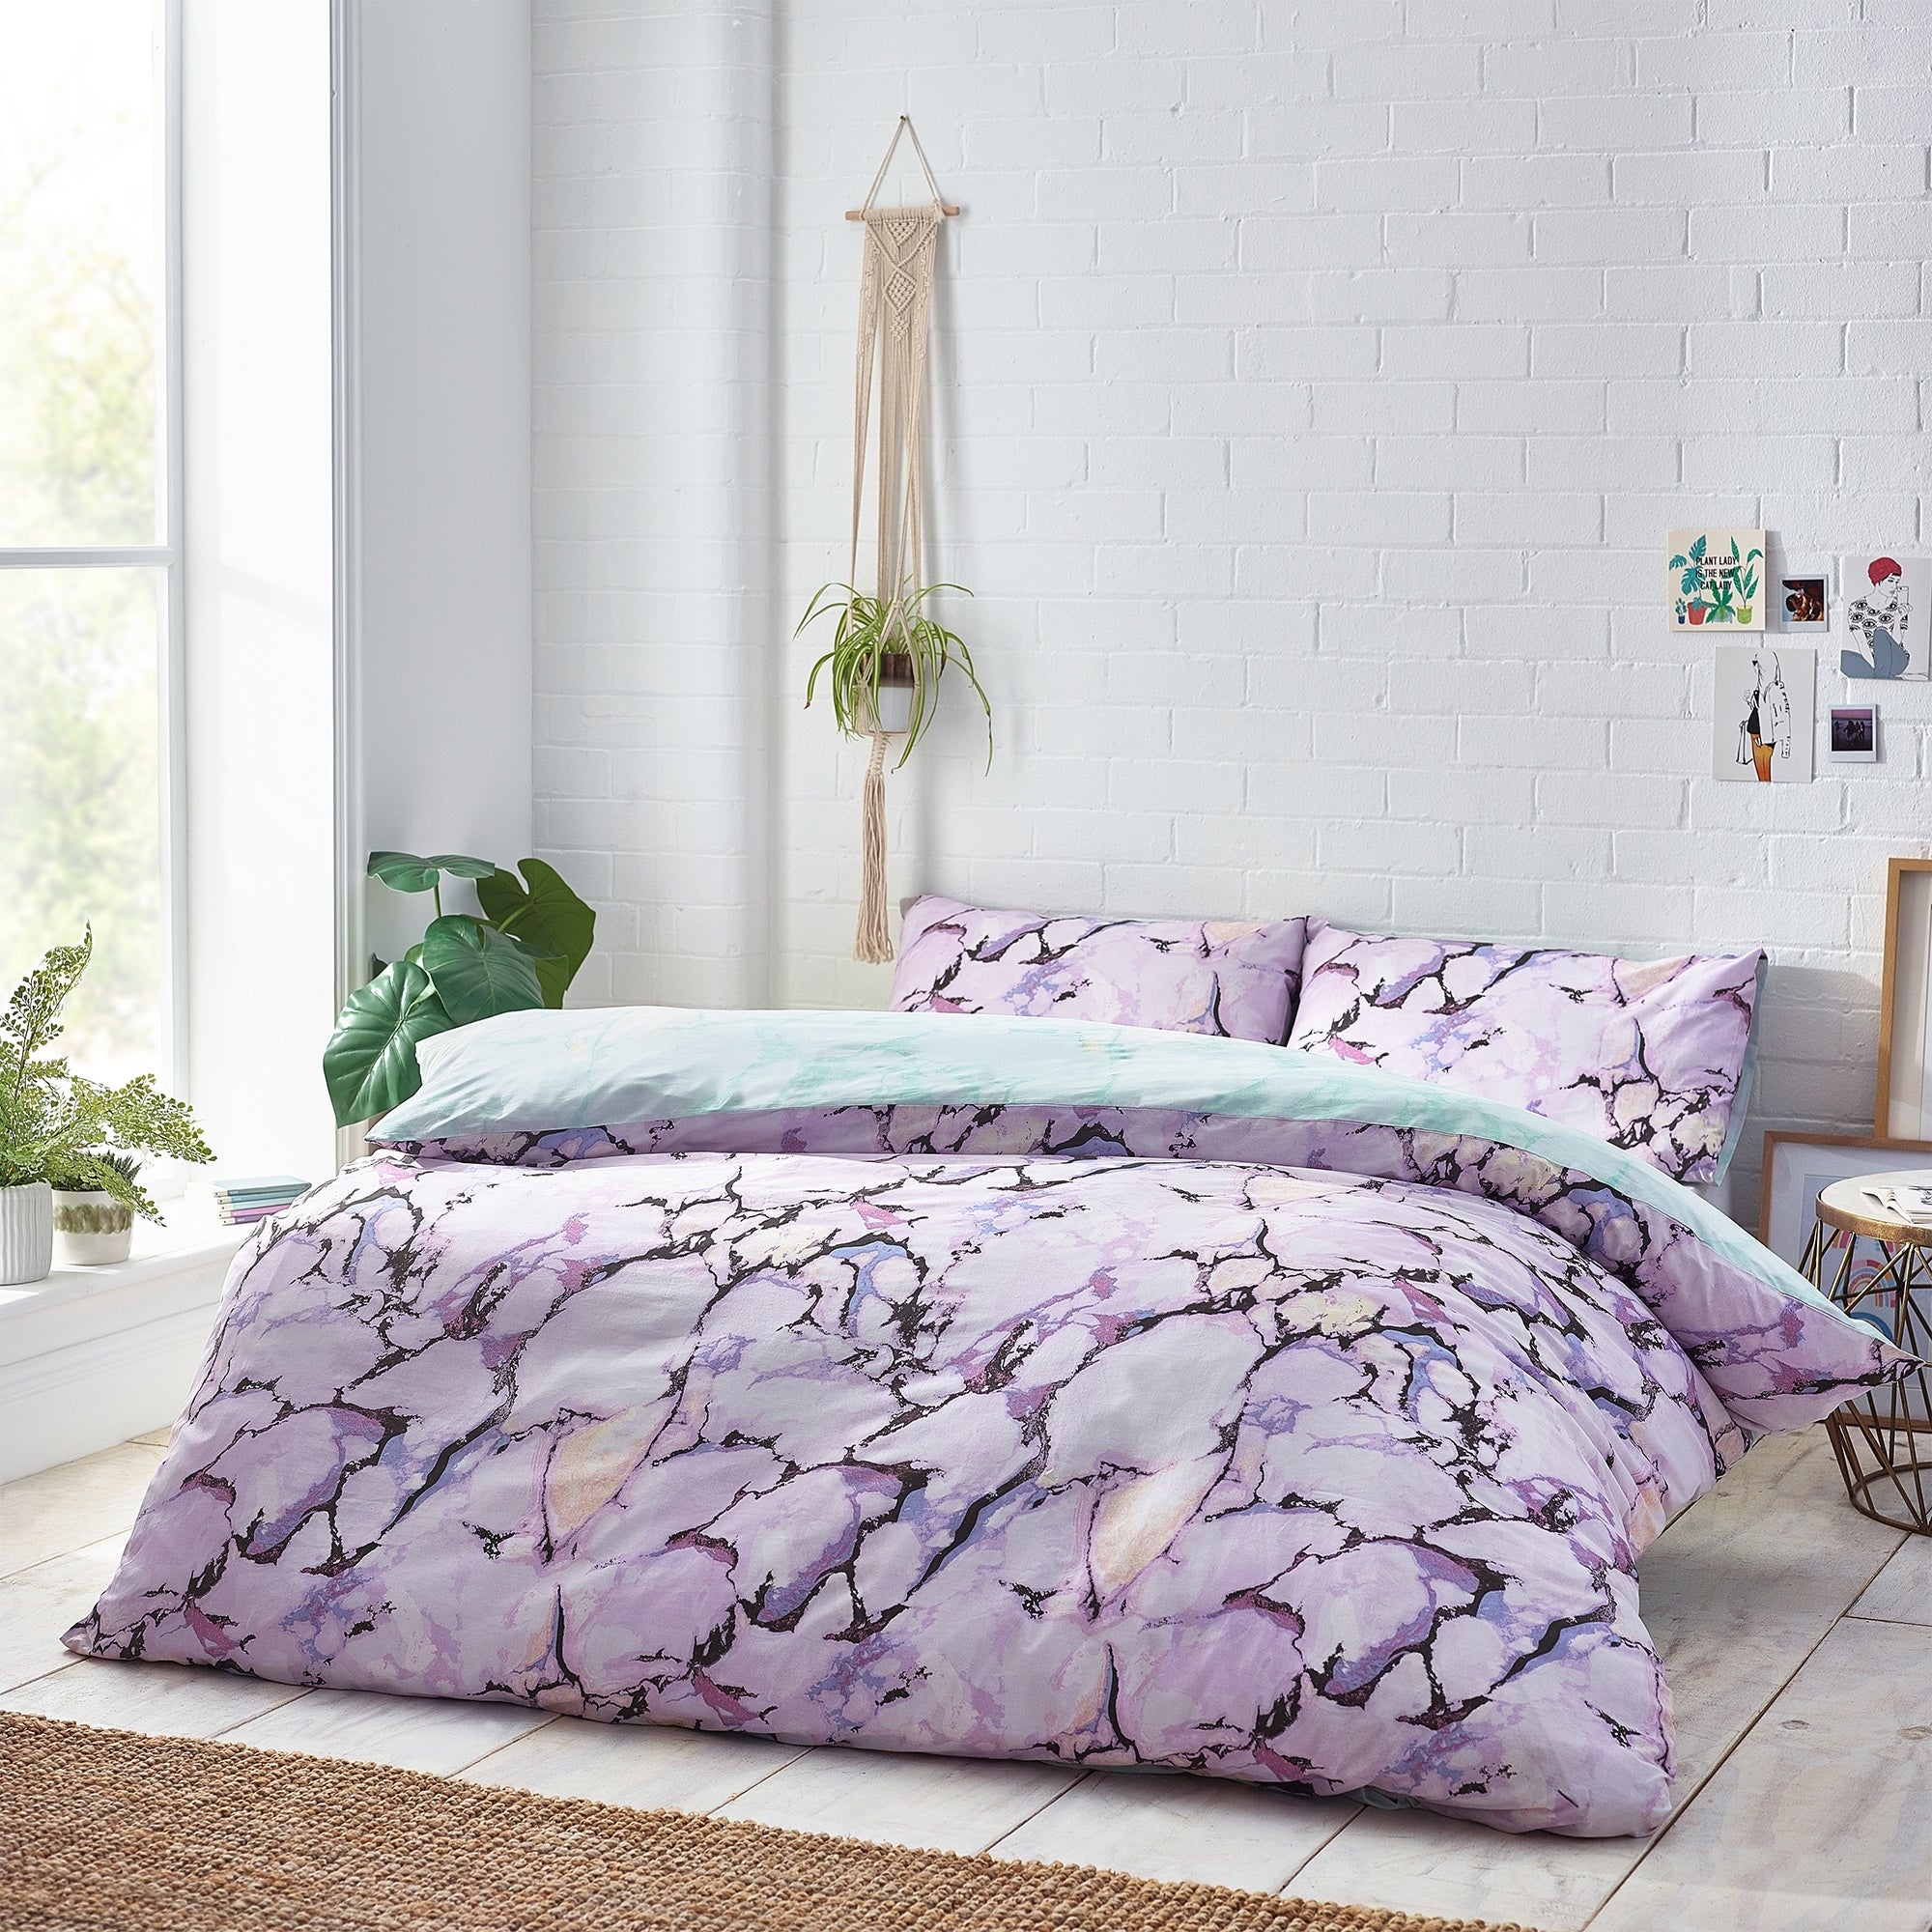 Style Lab Marble Duvet Cover And Pillowcase Set Lavender